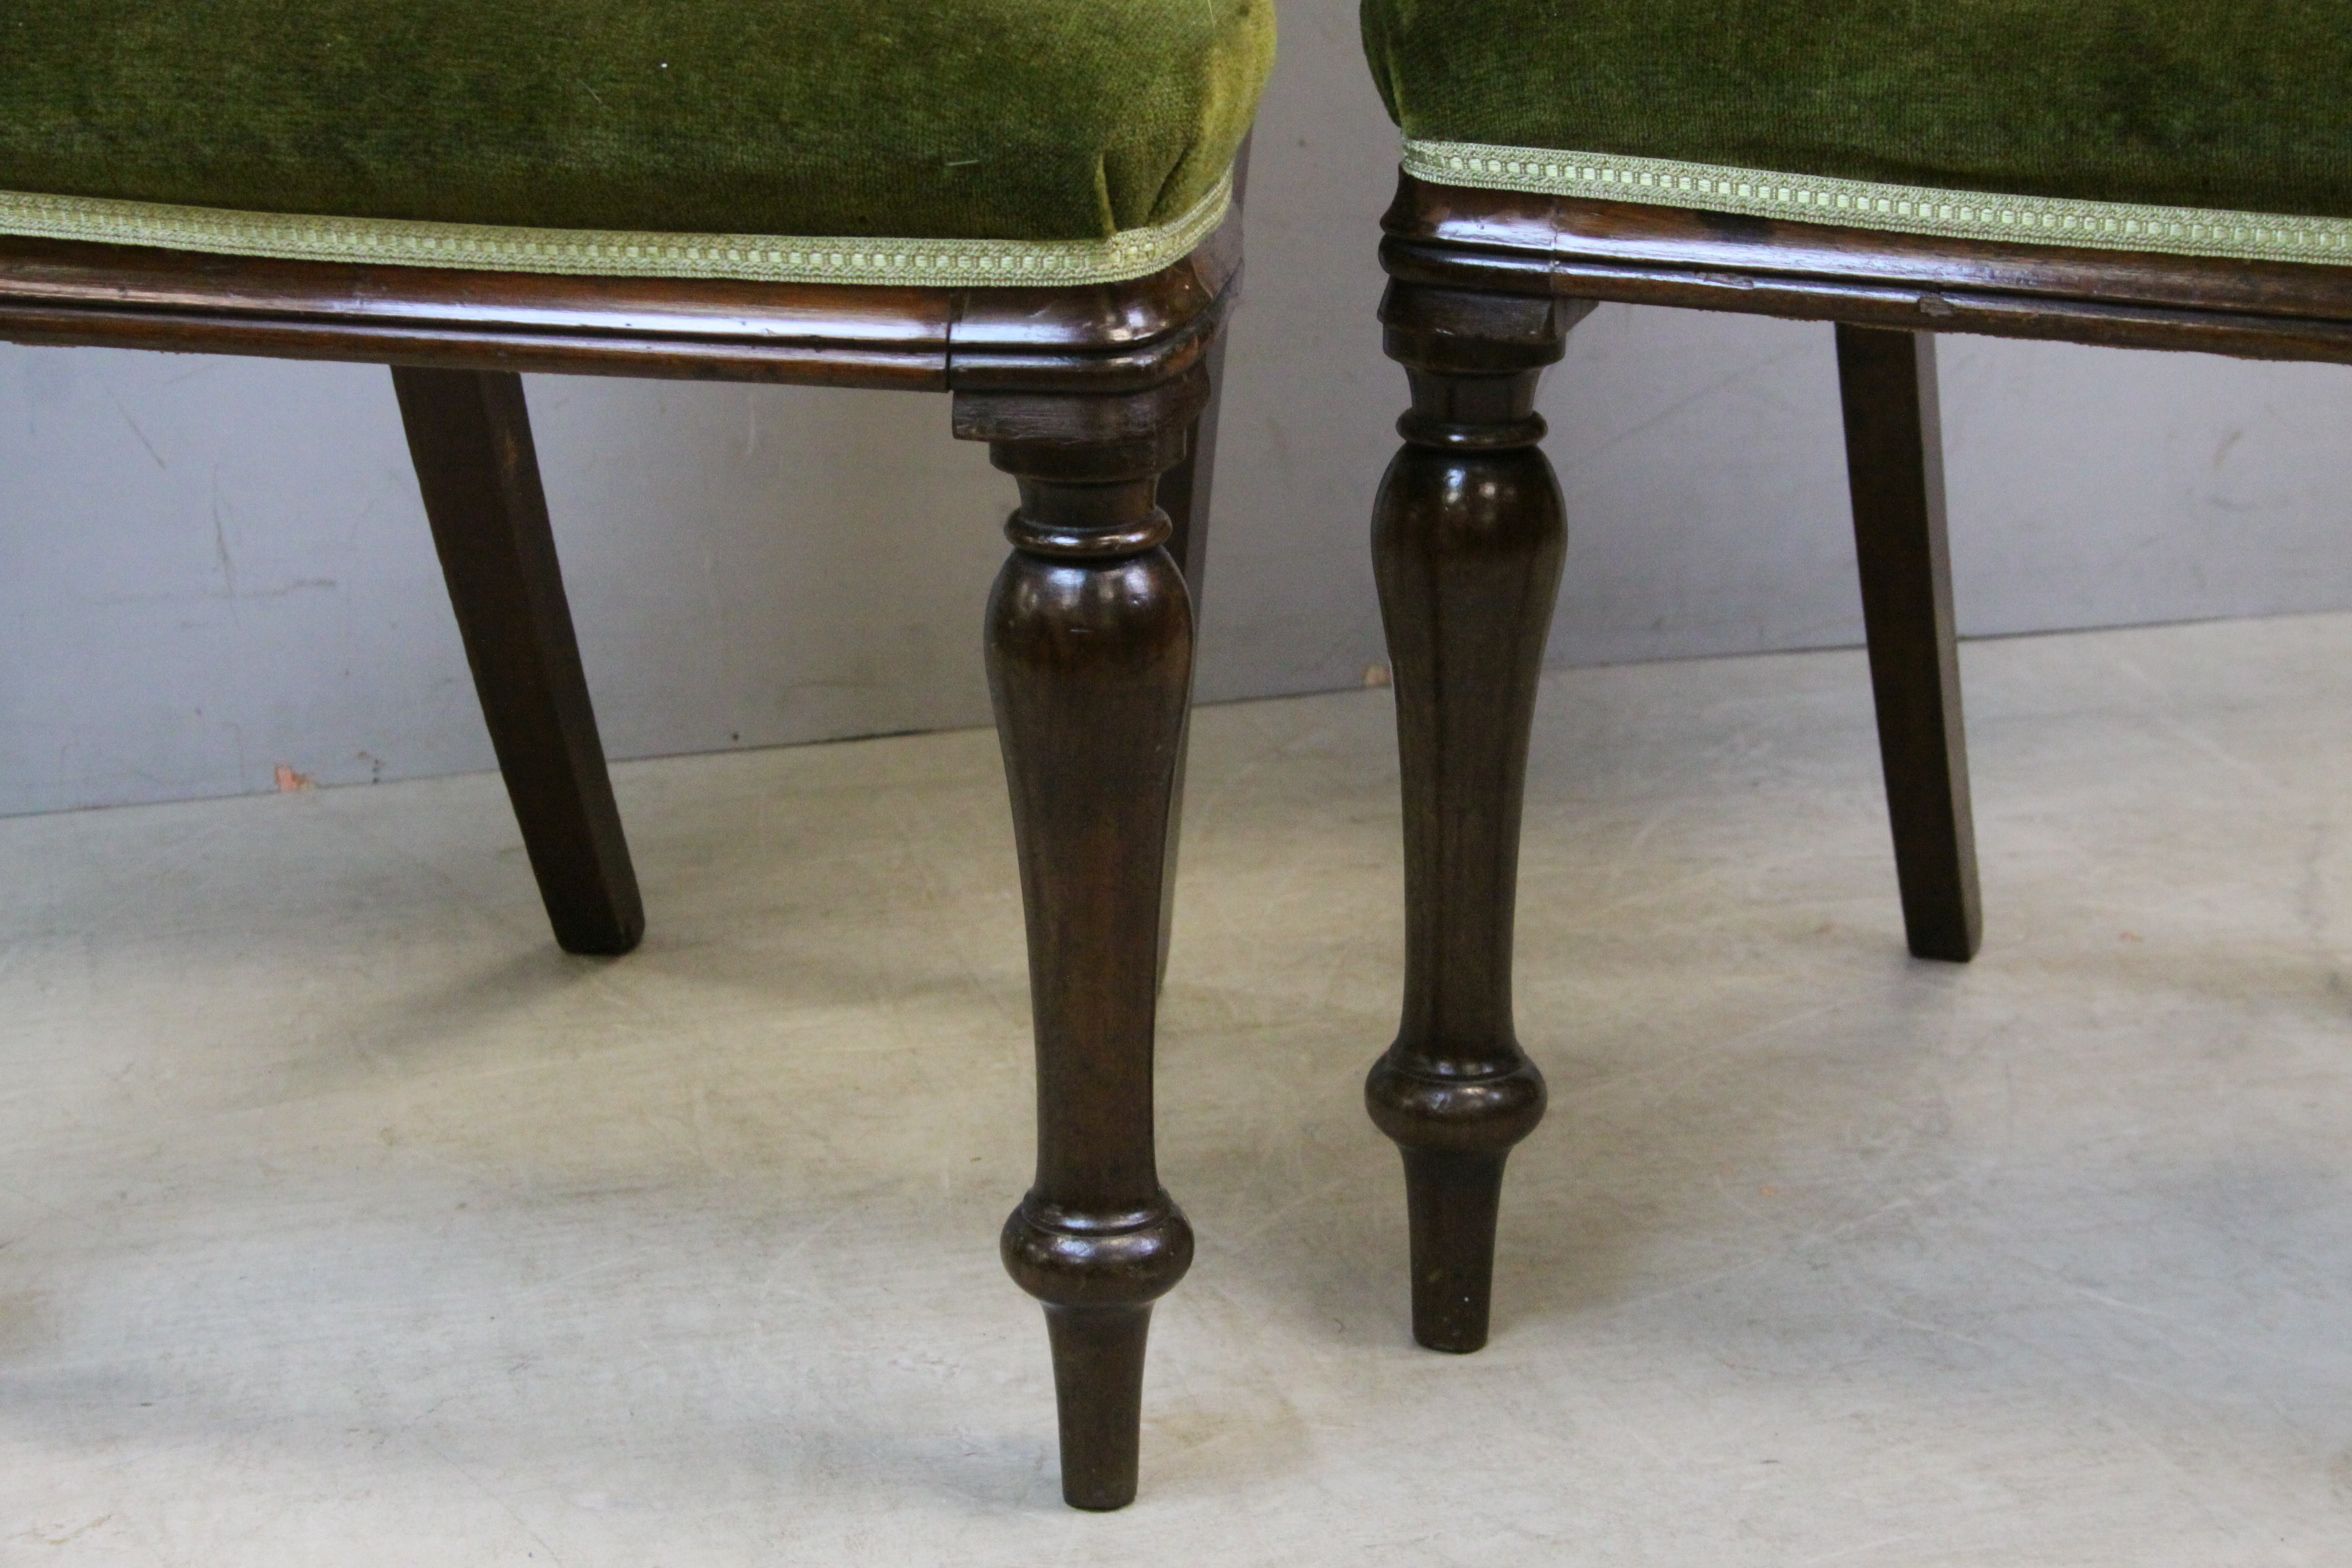 Pair of Victorian Mahogany Spoon Back Dining Chairs with Green Upholstered Backs and Seats - Image 3 of 3